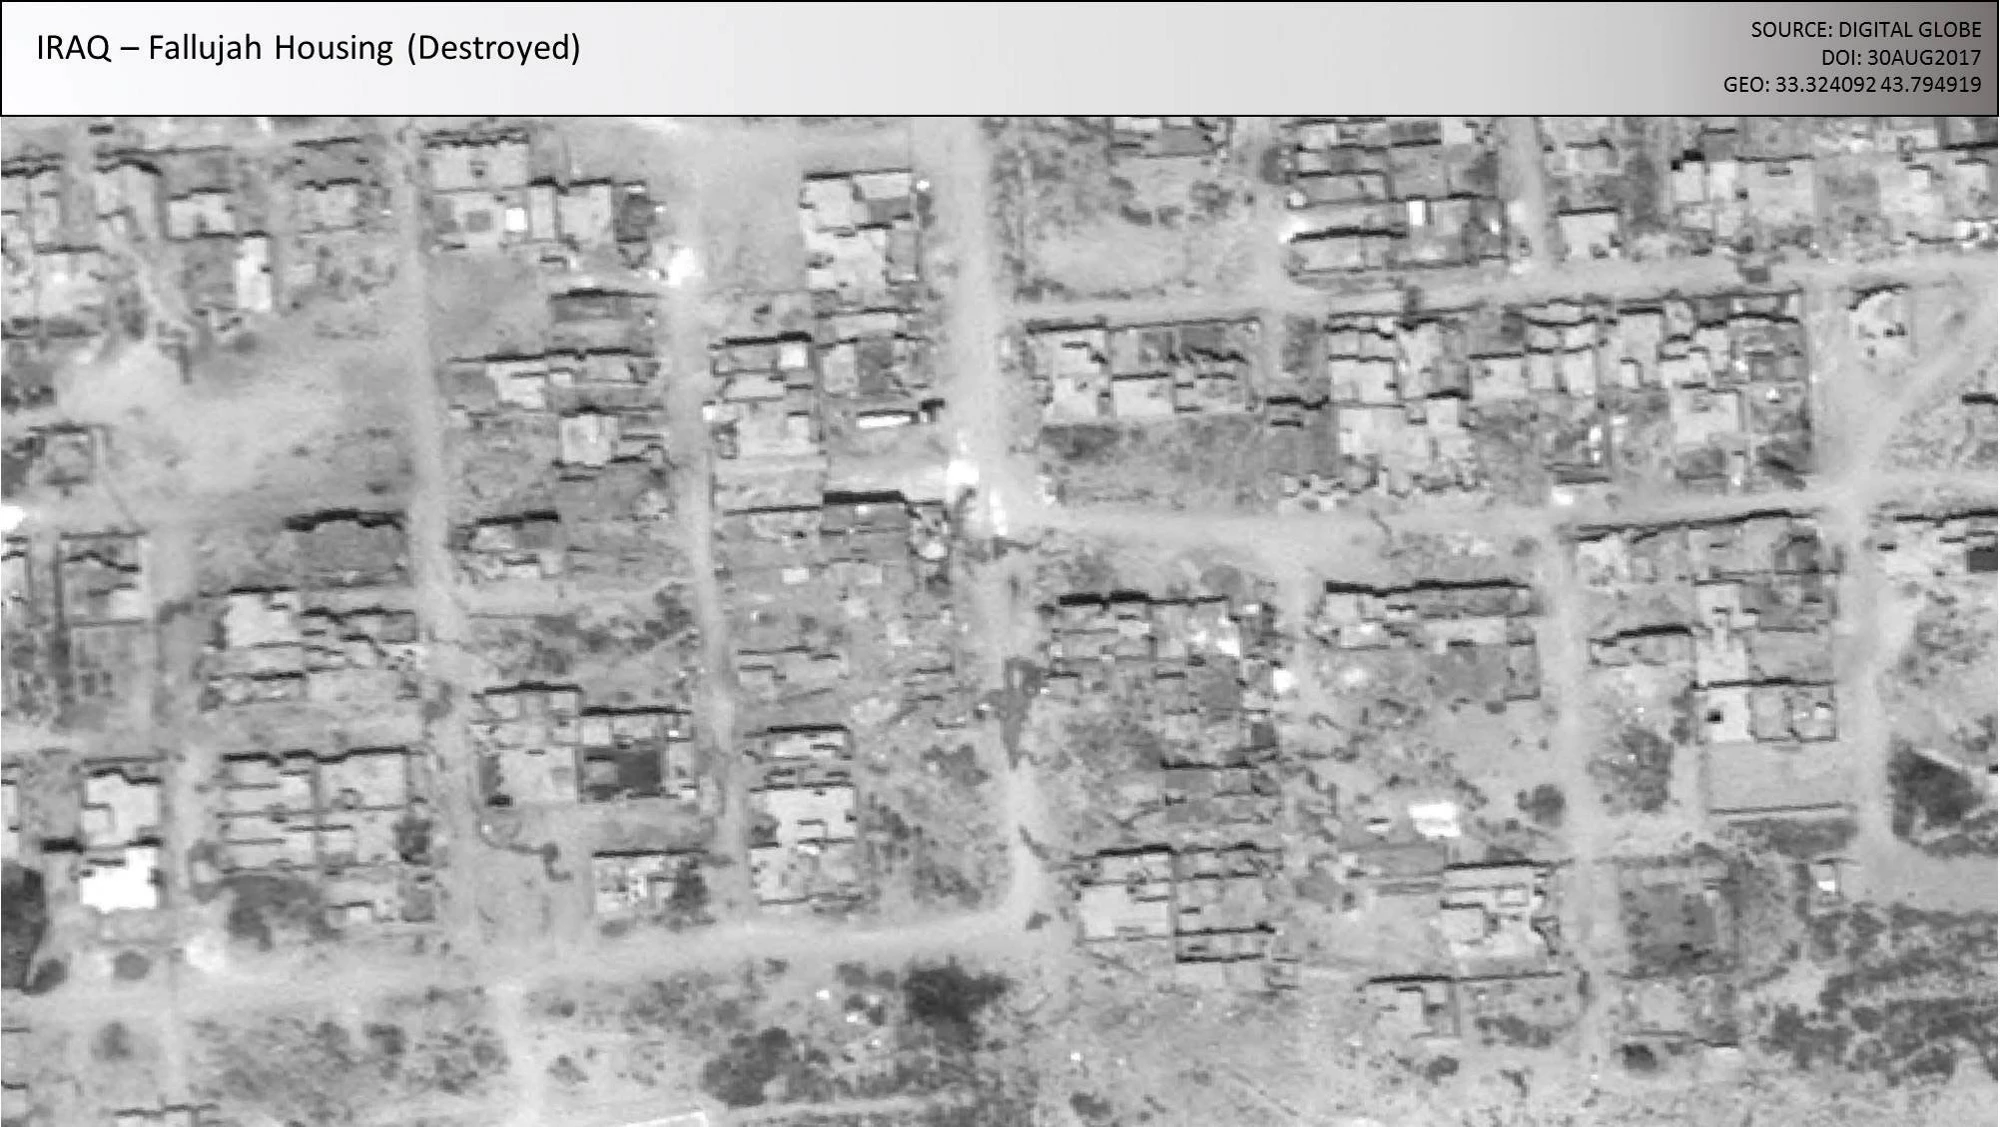 Aerial view of Fallujah housing that was destroyed